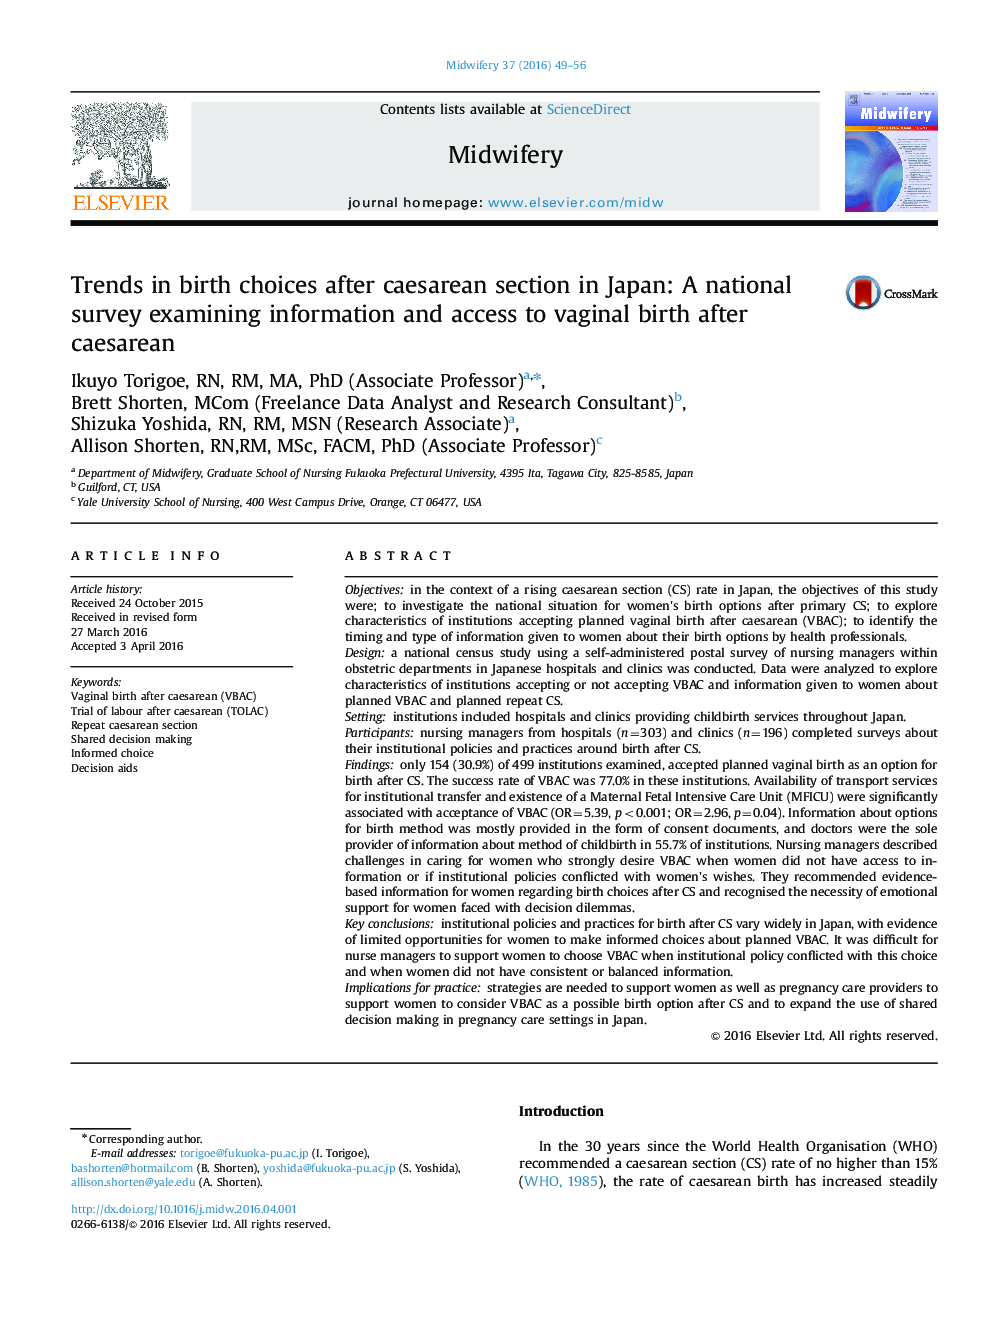 Trends in birth choices after caesarean section in Japan: A national survey examining information and access to vaginal birth after caesarean